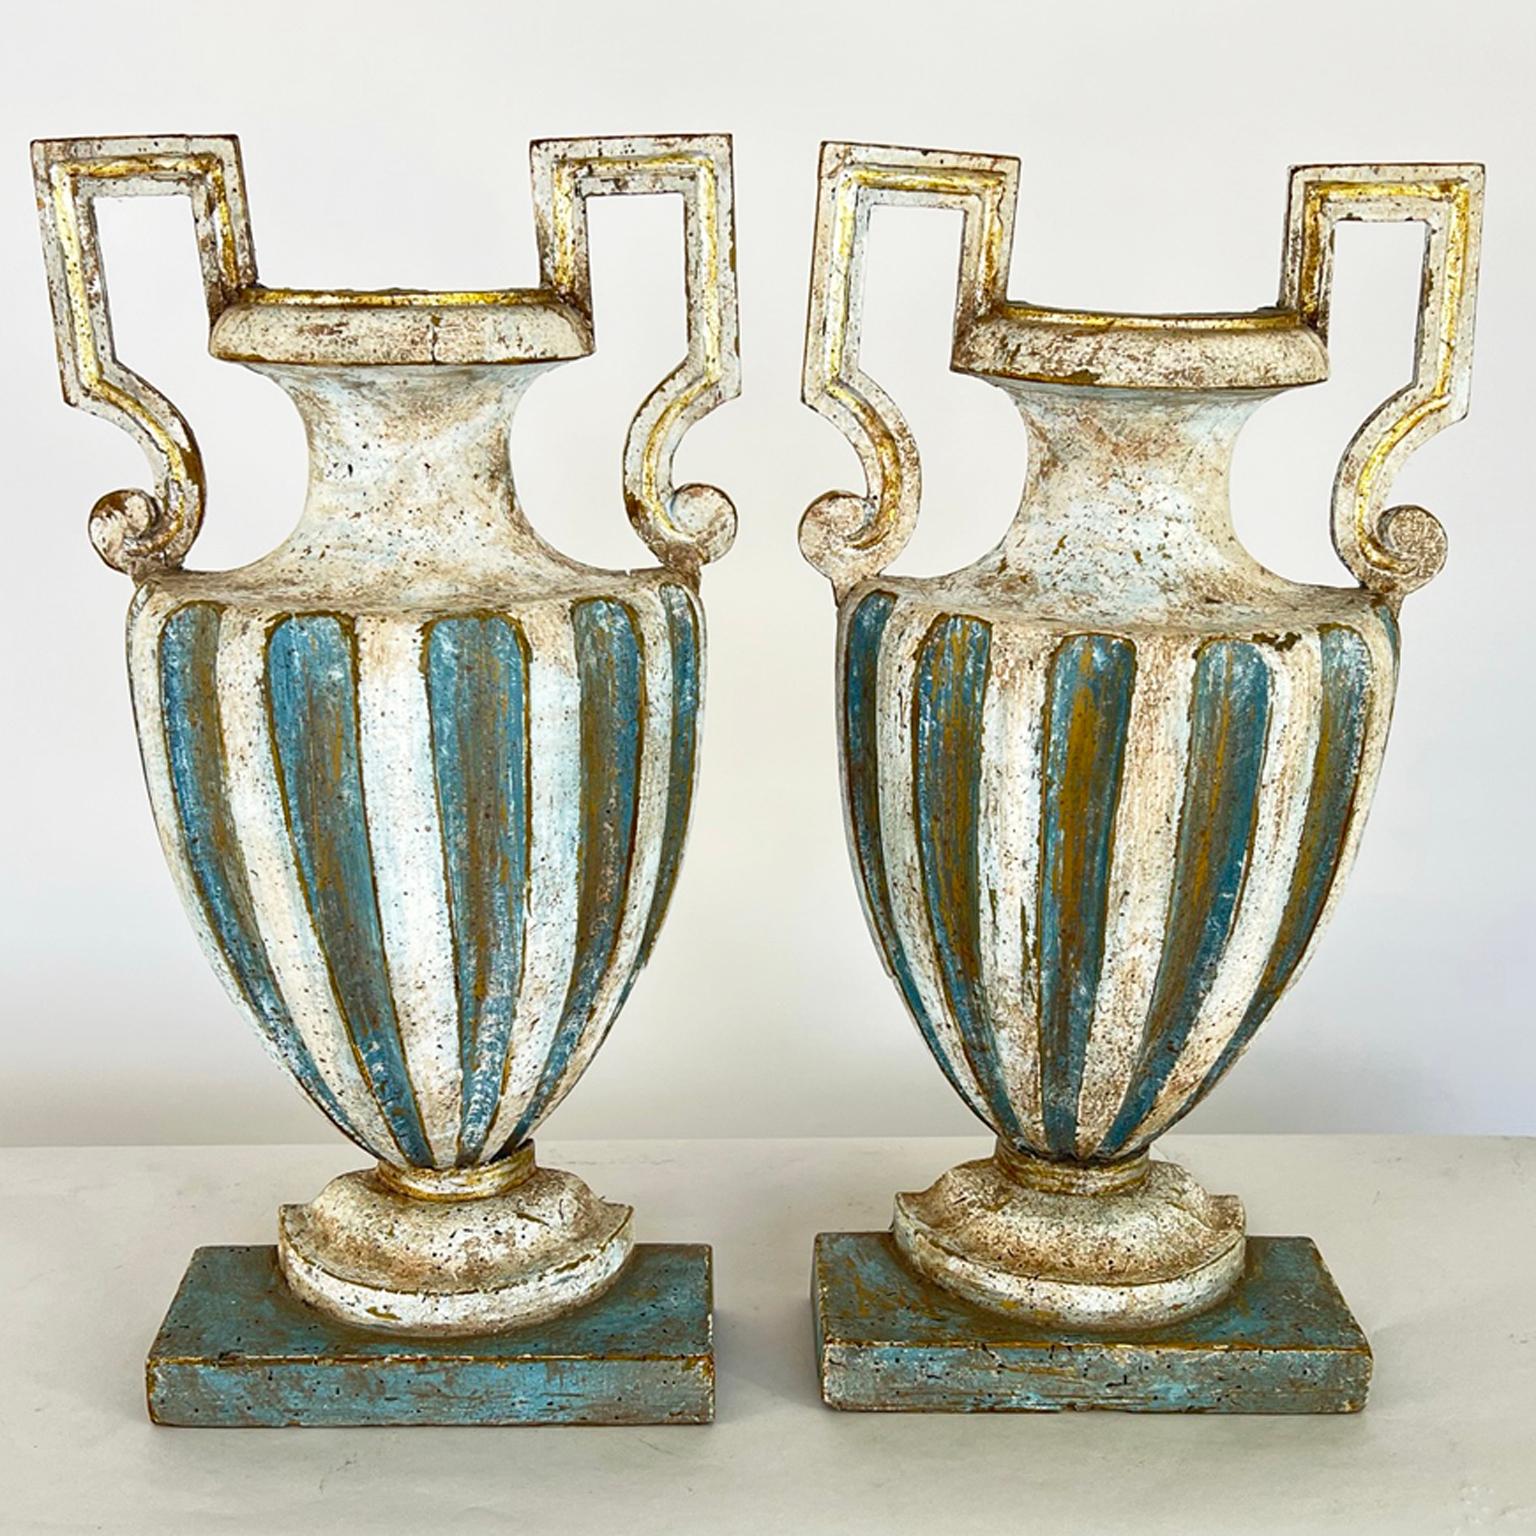 Painted Pair of 18th Century Half-Urn Carved Wood Decorations For Sale